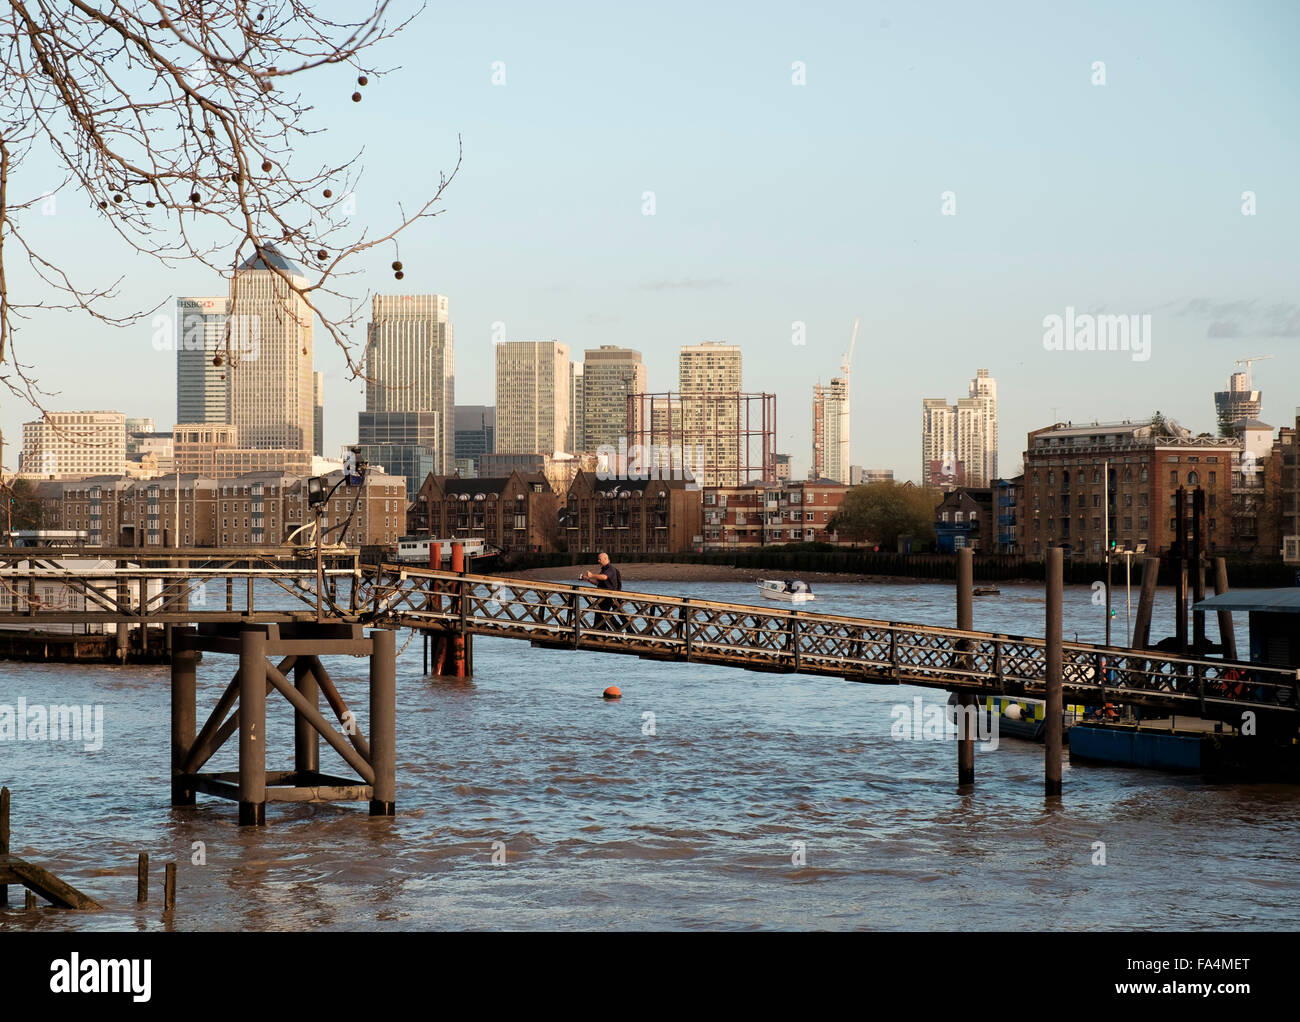 London, 25 November 2015: Canary Wharf viewed through the jetty of the Metropolitan Police Marine Policing Unit Wapping Stock Photo